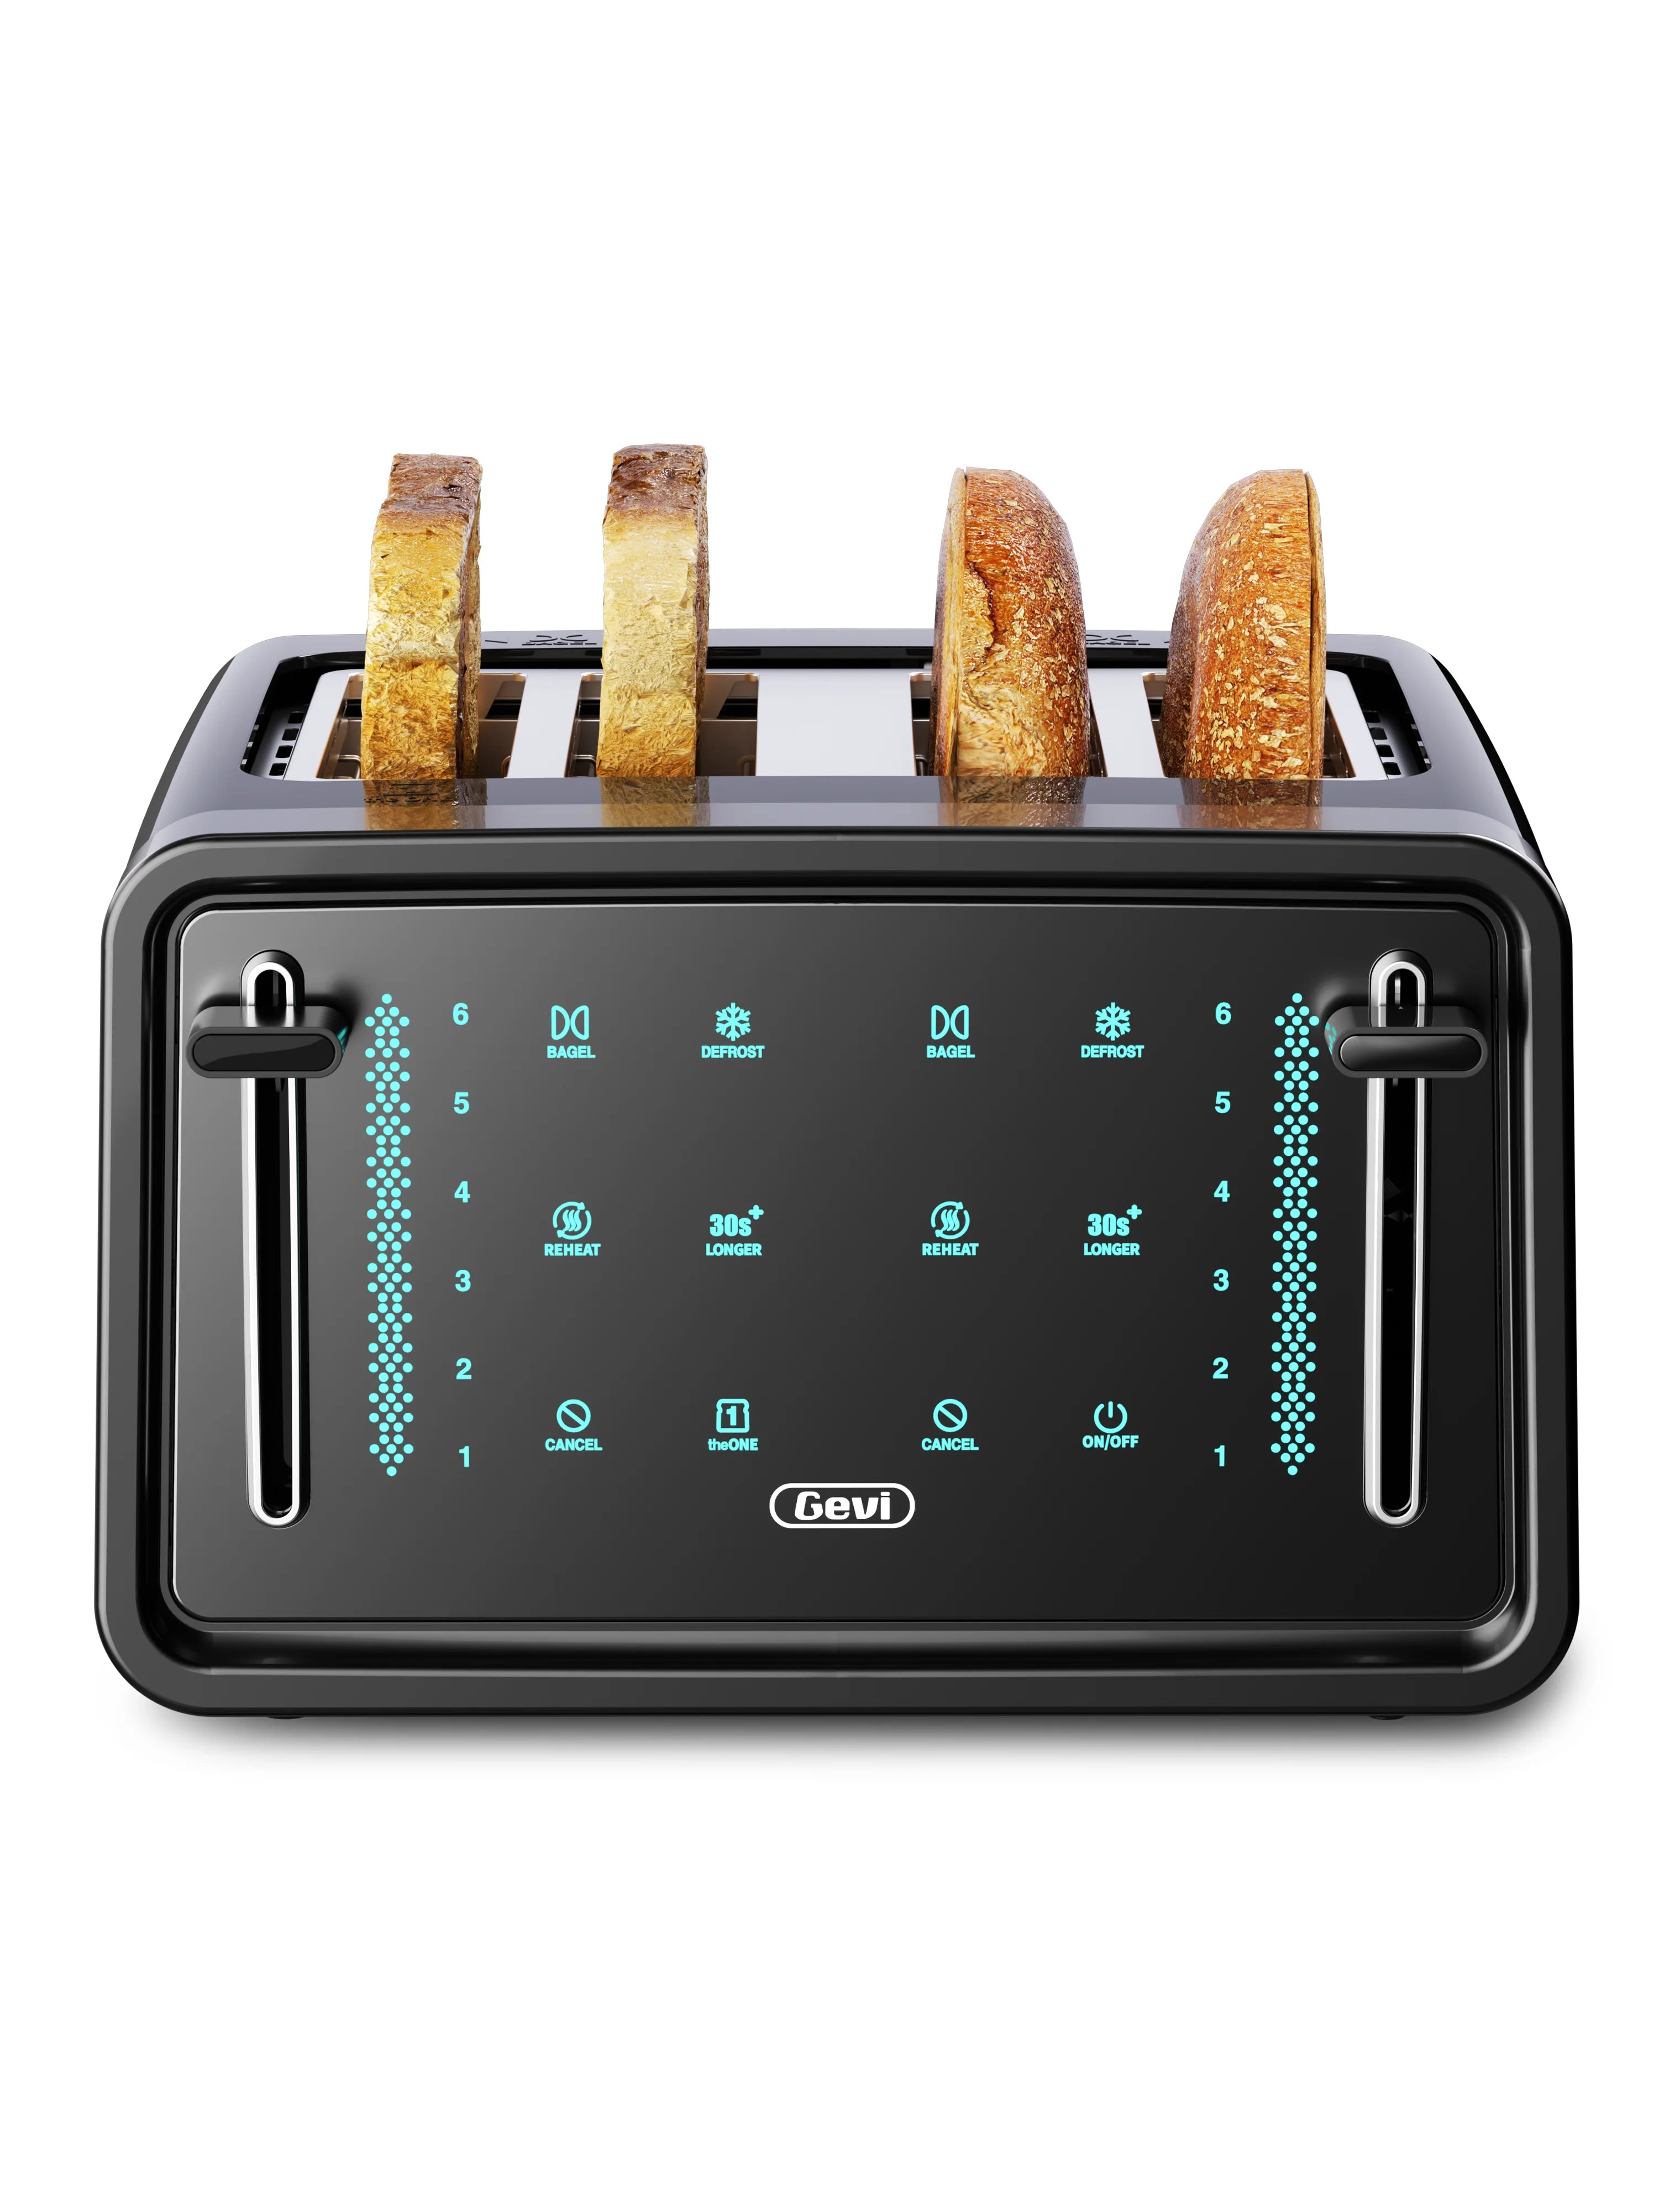  Toaster 4 Slice, Toaster 2 Long Slot Best Rated Prime